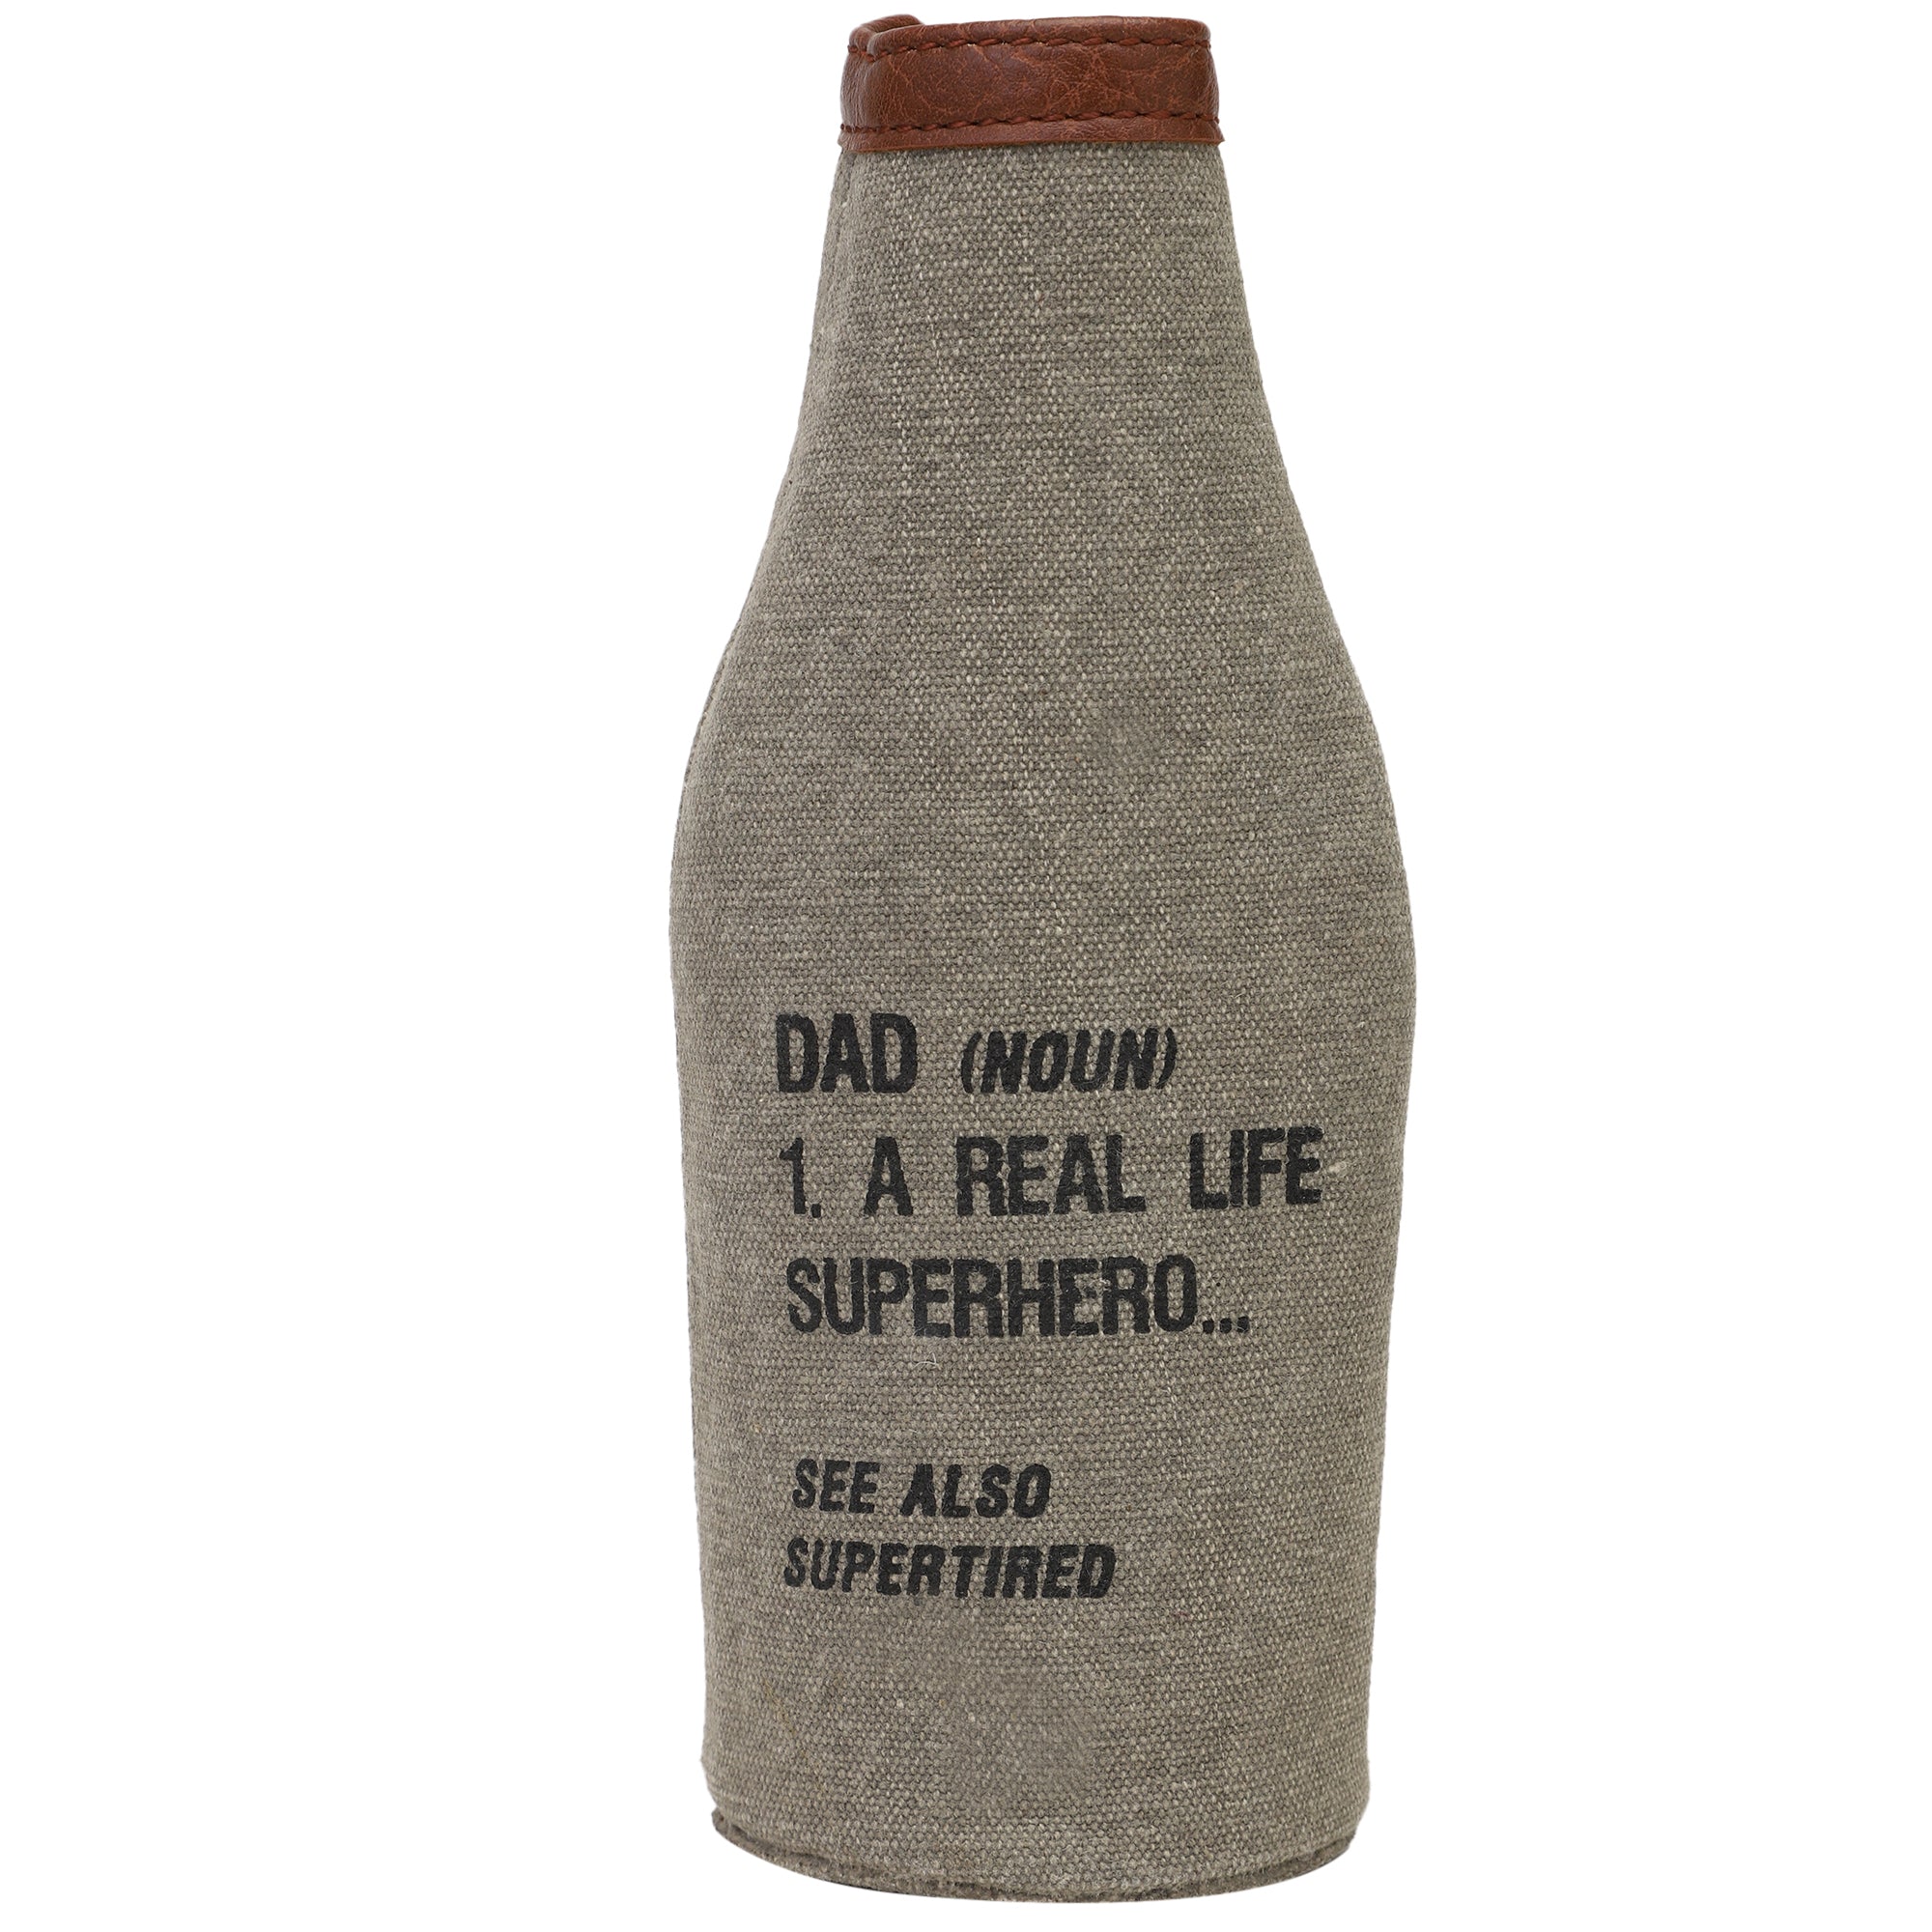 Mona B Pint Beer Bottle Covers with Stylish Printing for Men and Women (SUPER DAD)